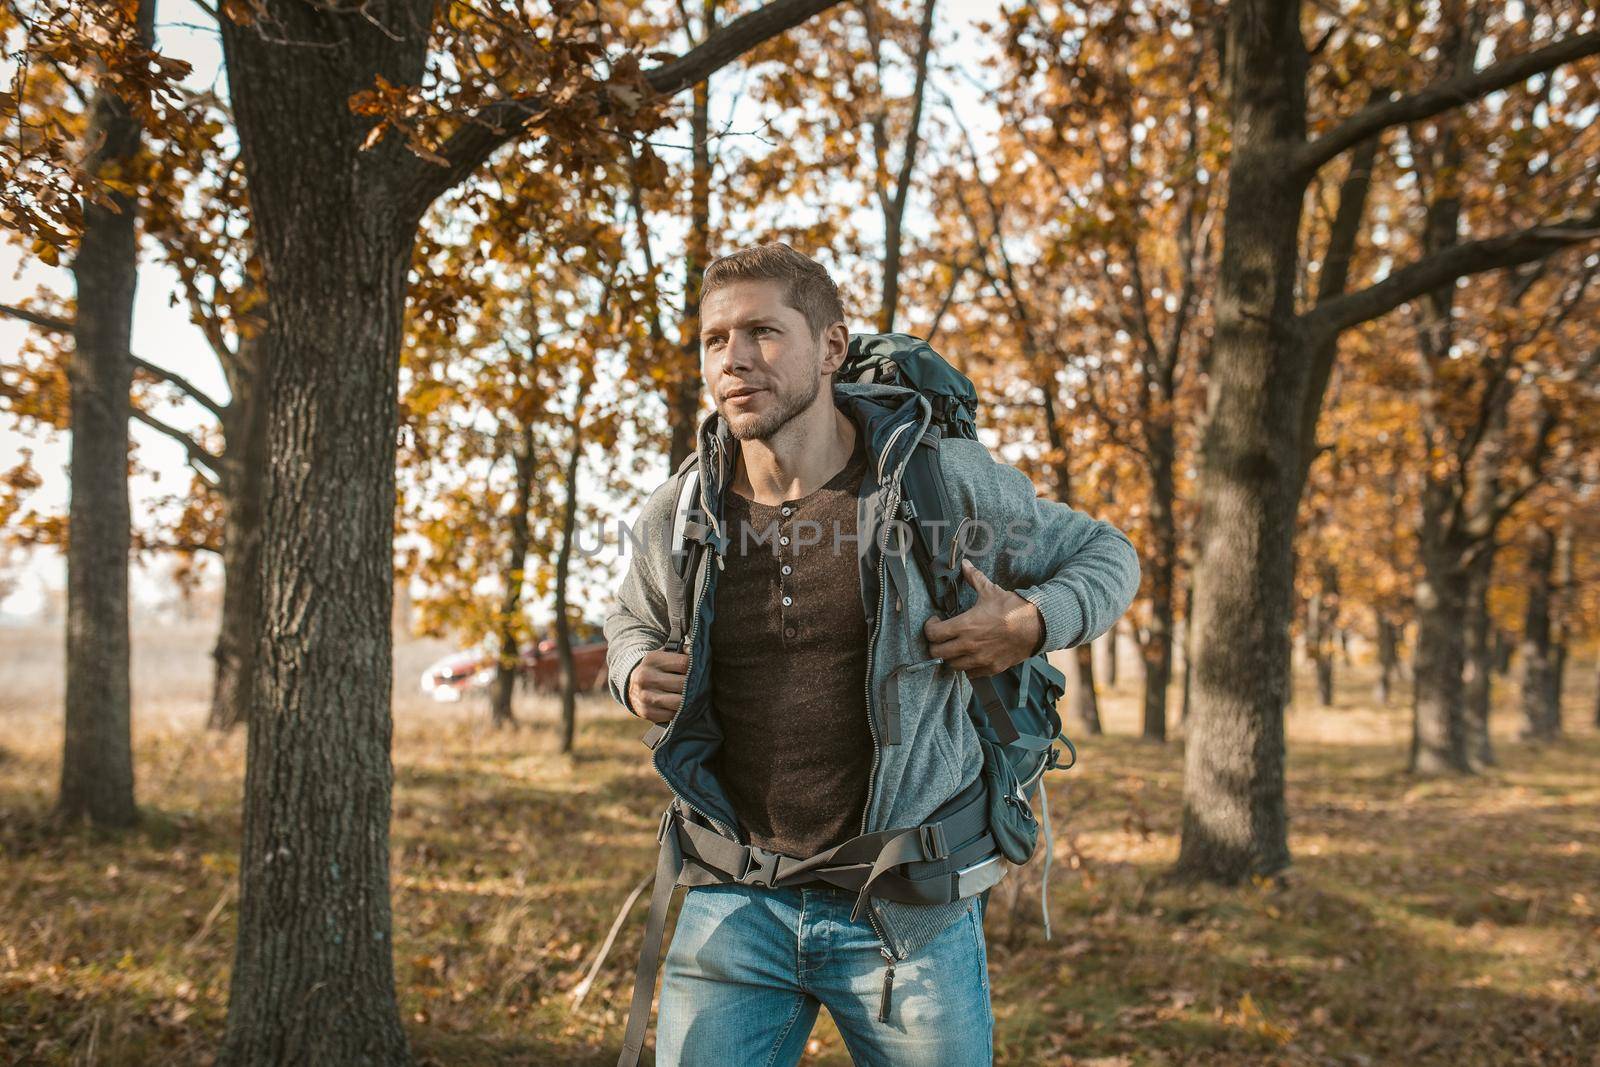 Tourist at the beginning of the journey. An inspired guy with a big backpack got out of a red car and begins his journey through the autumn forest. Hiking concept.